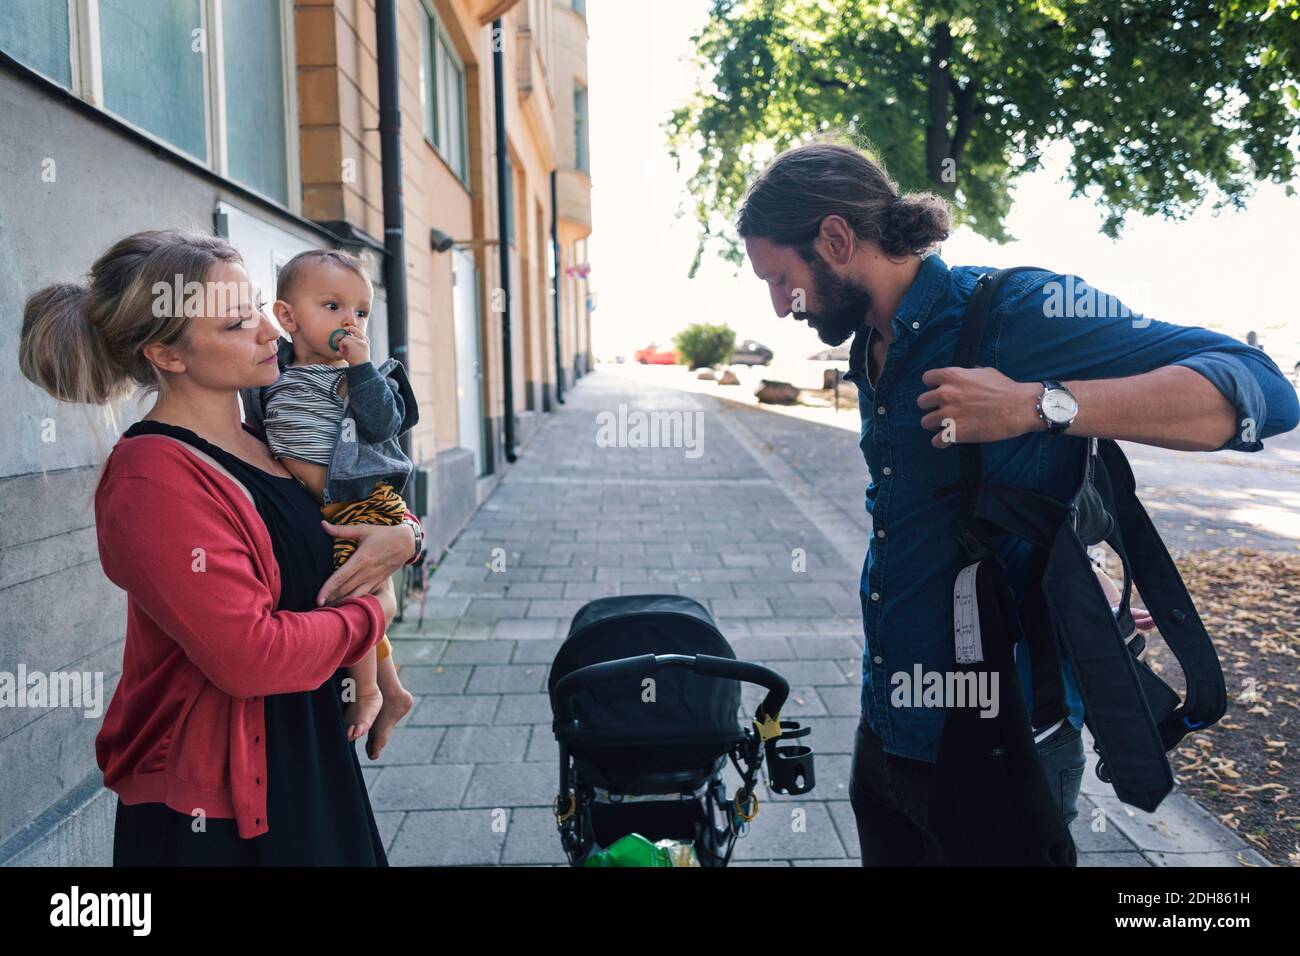 Mother with son looking at man wearing baby carrier on sidewalk Stock Photo